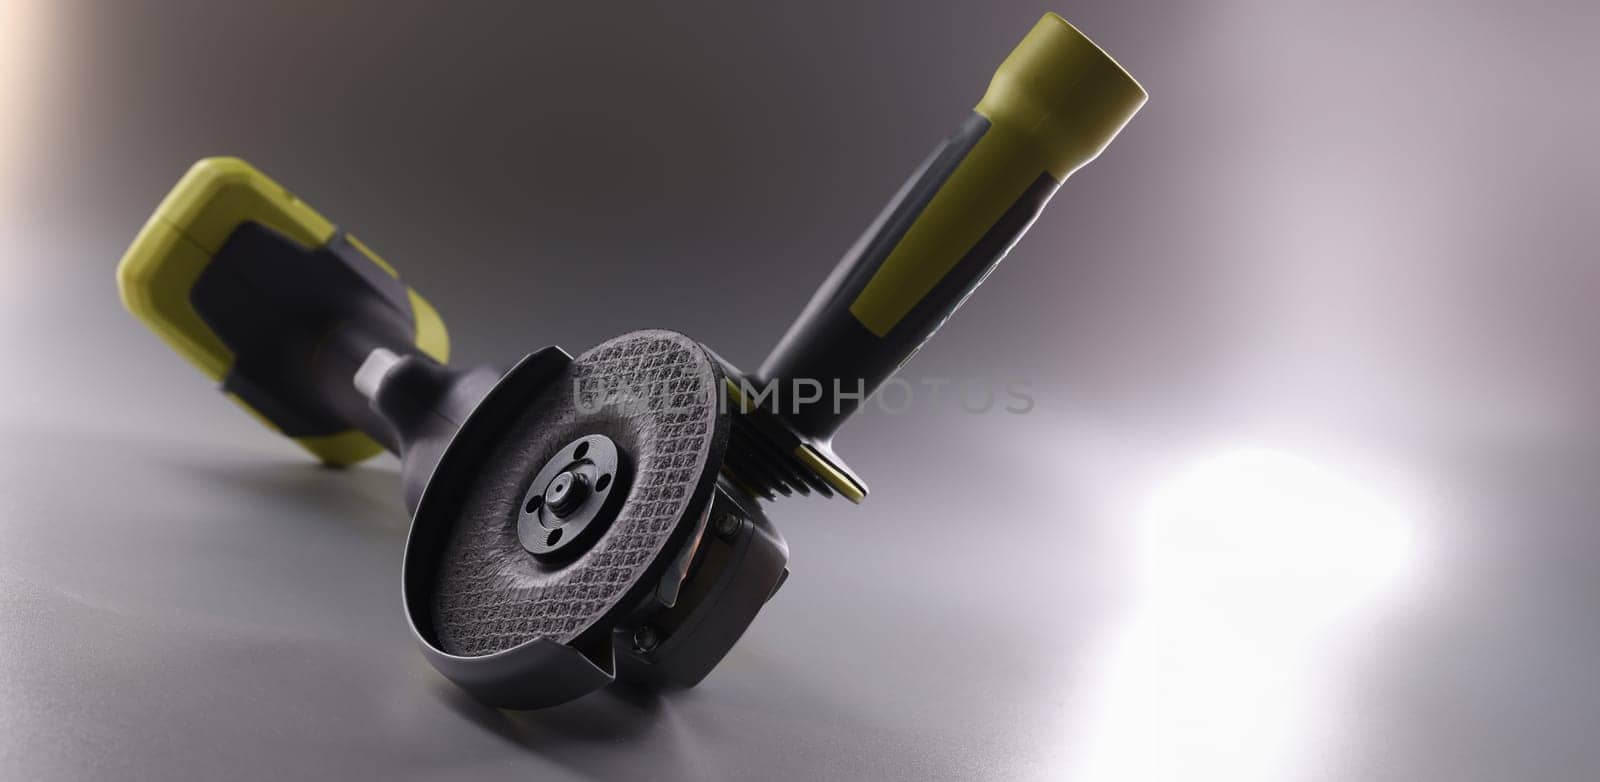 Professional angle grinder with disc on gray background. Construction tool concept